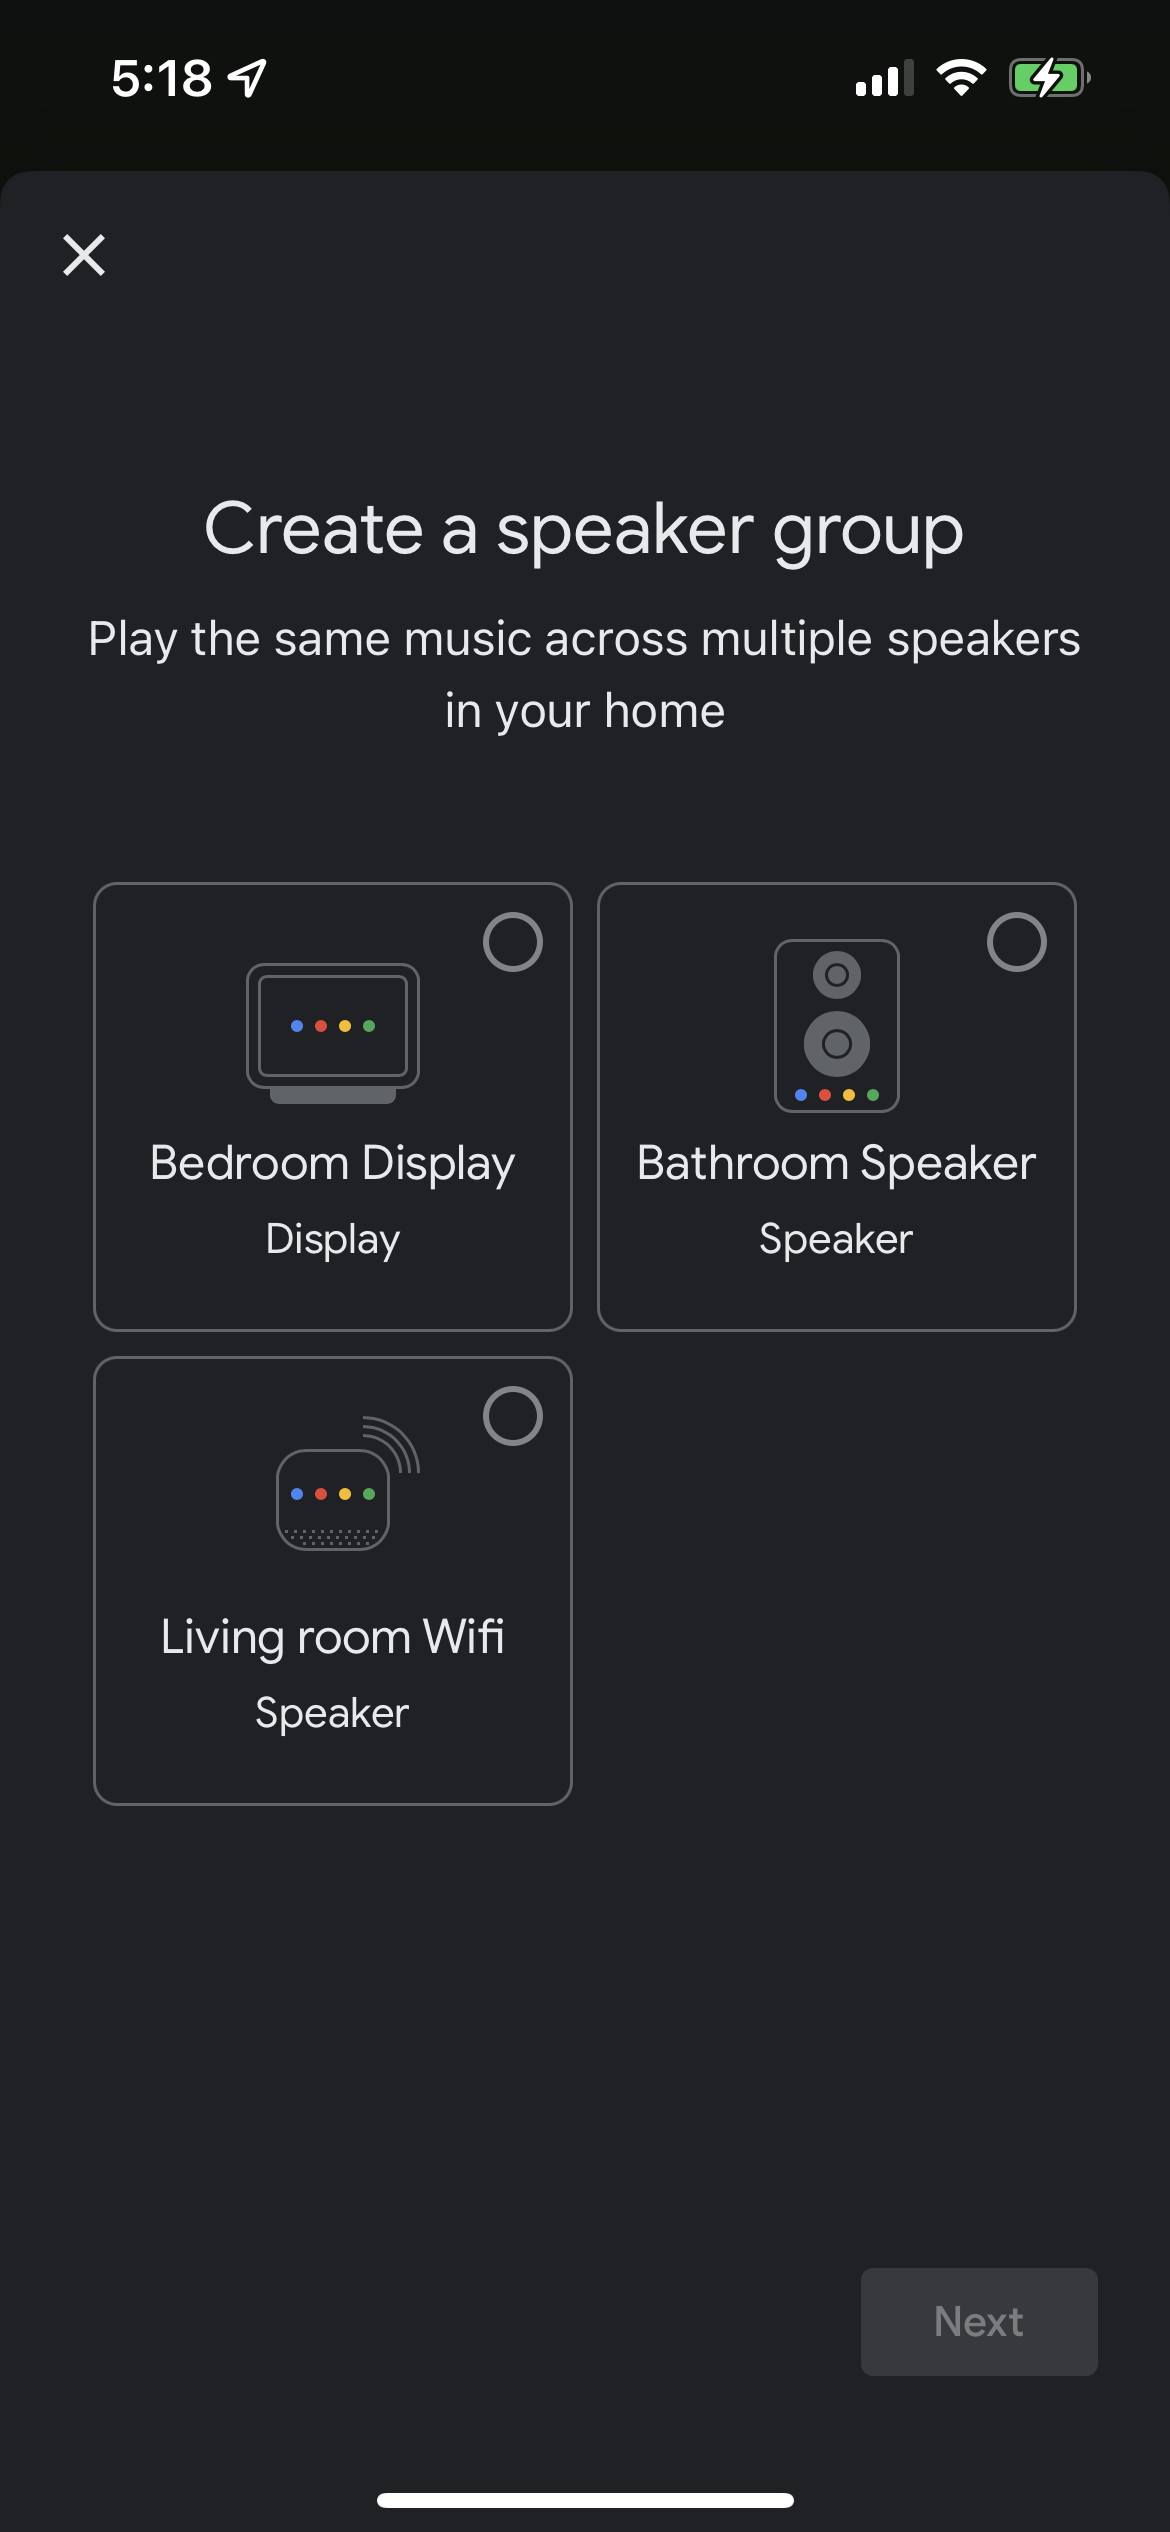 Creating a speaker group in the Google Home app